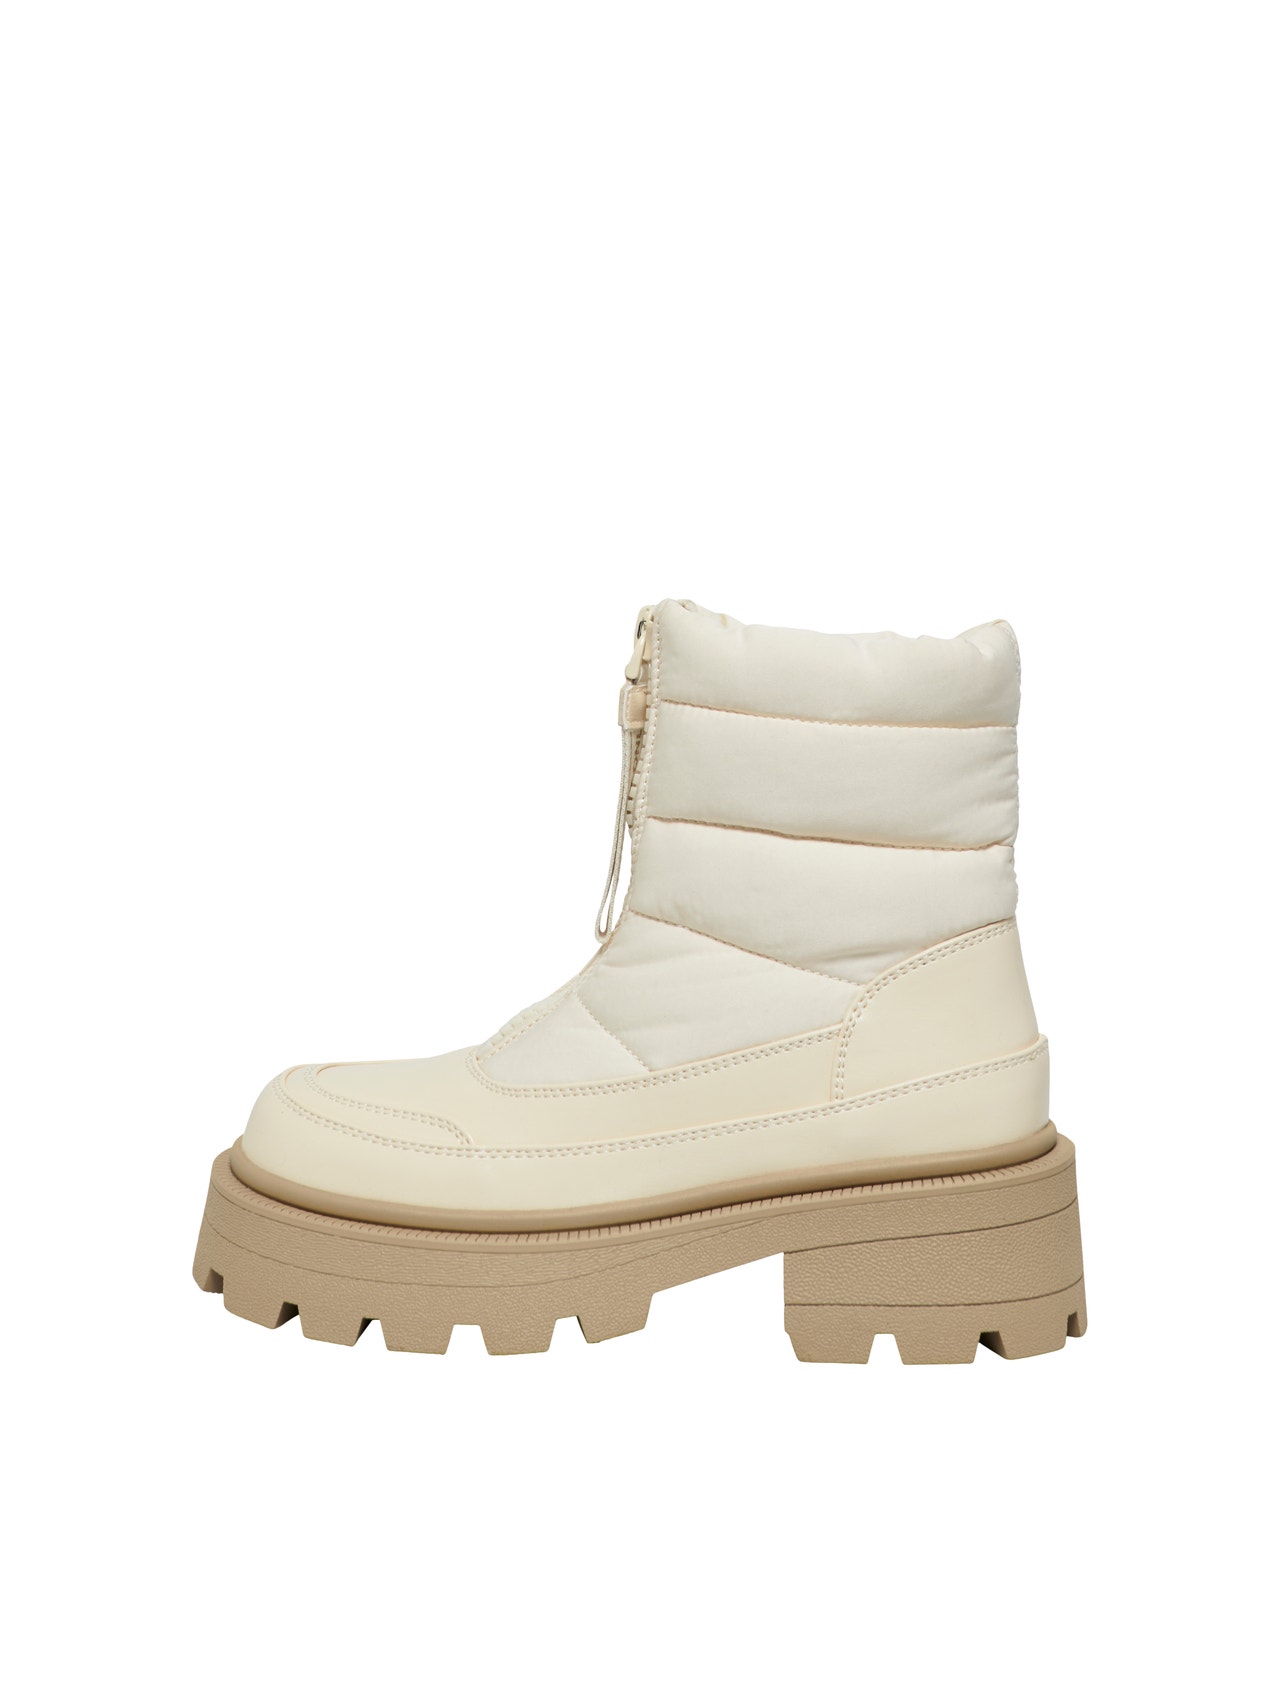 ONLY Round toe Boots -Creme - 15304727